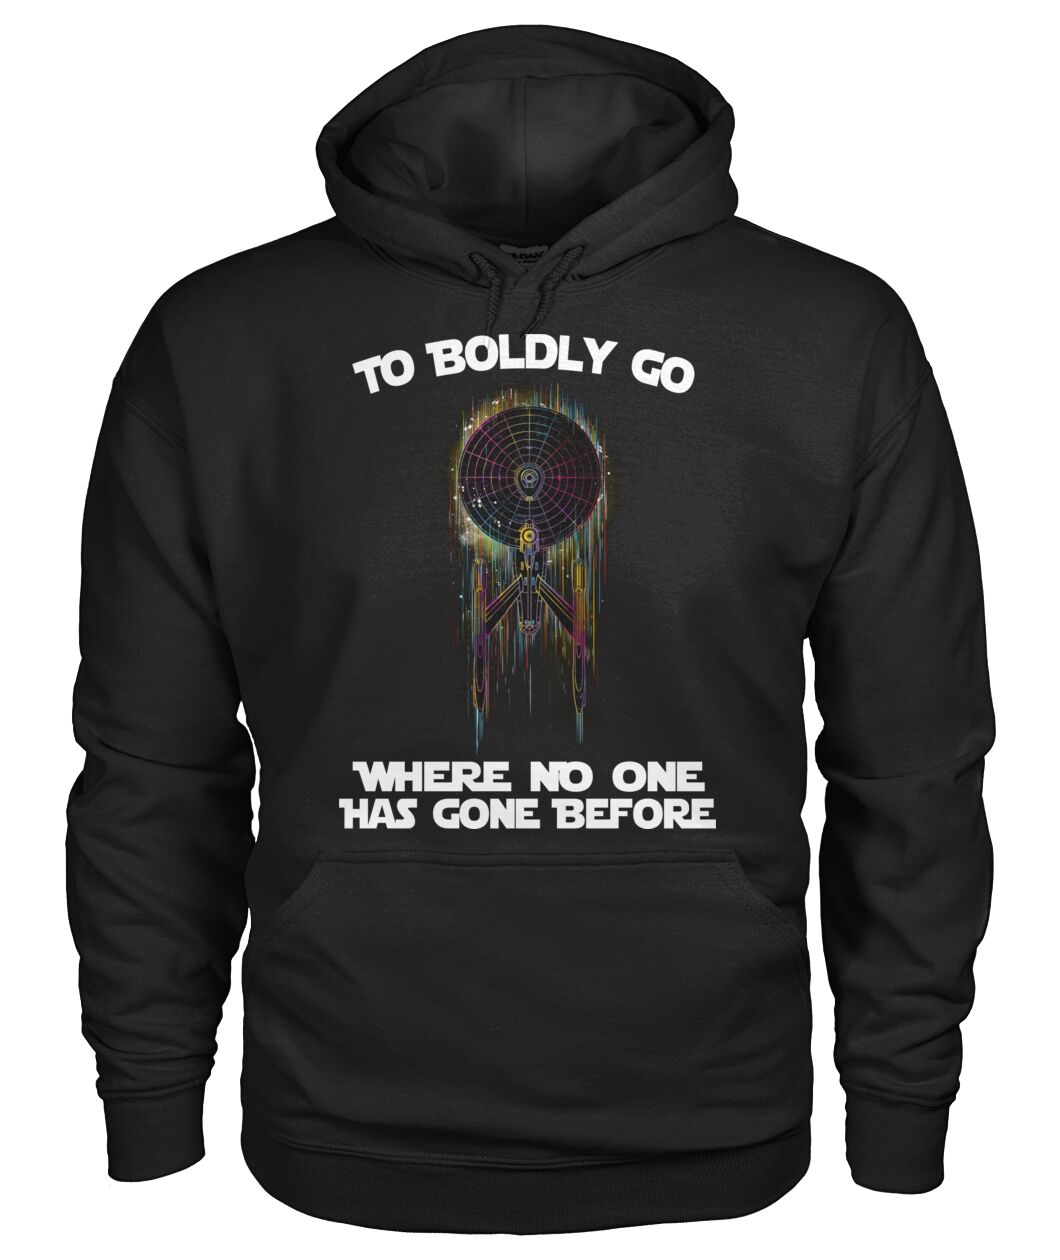 star trek to boldly go where no one has gone before hoodie